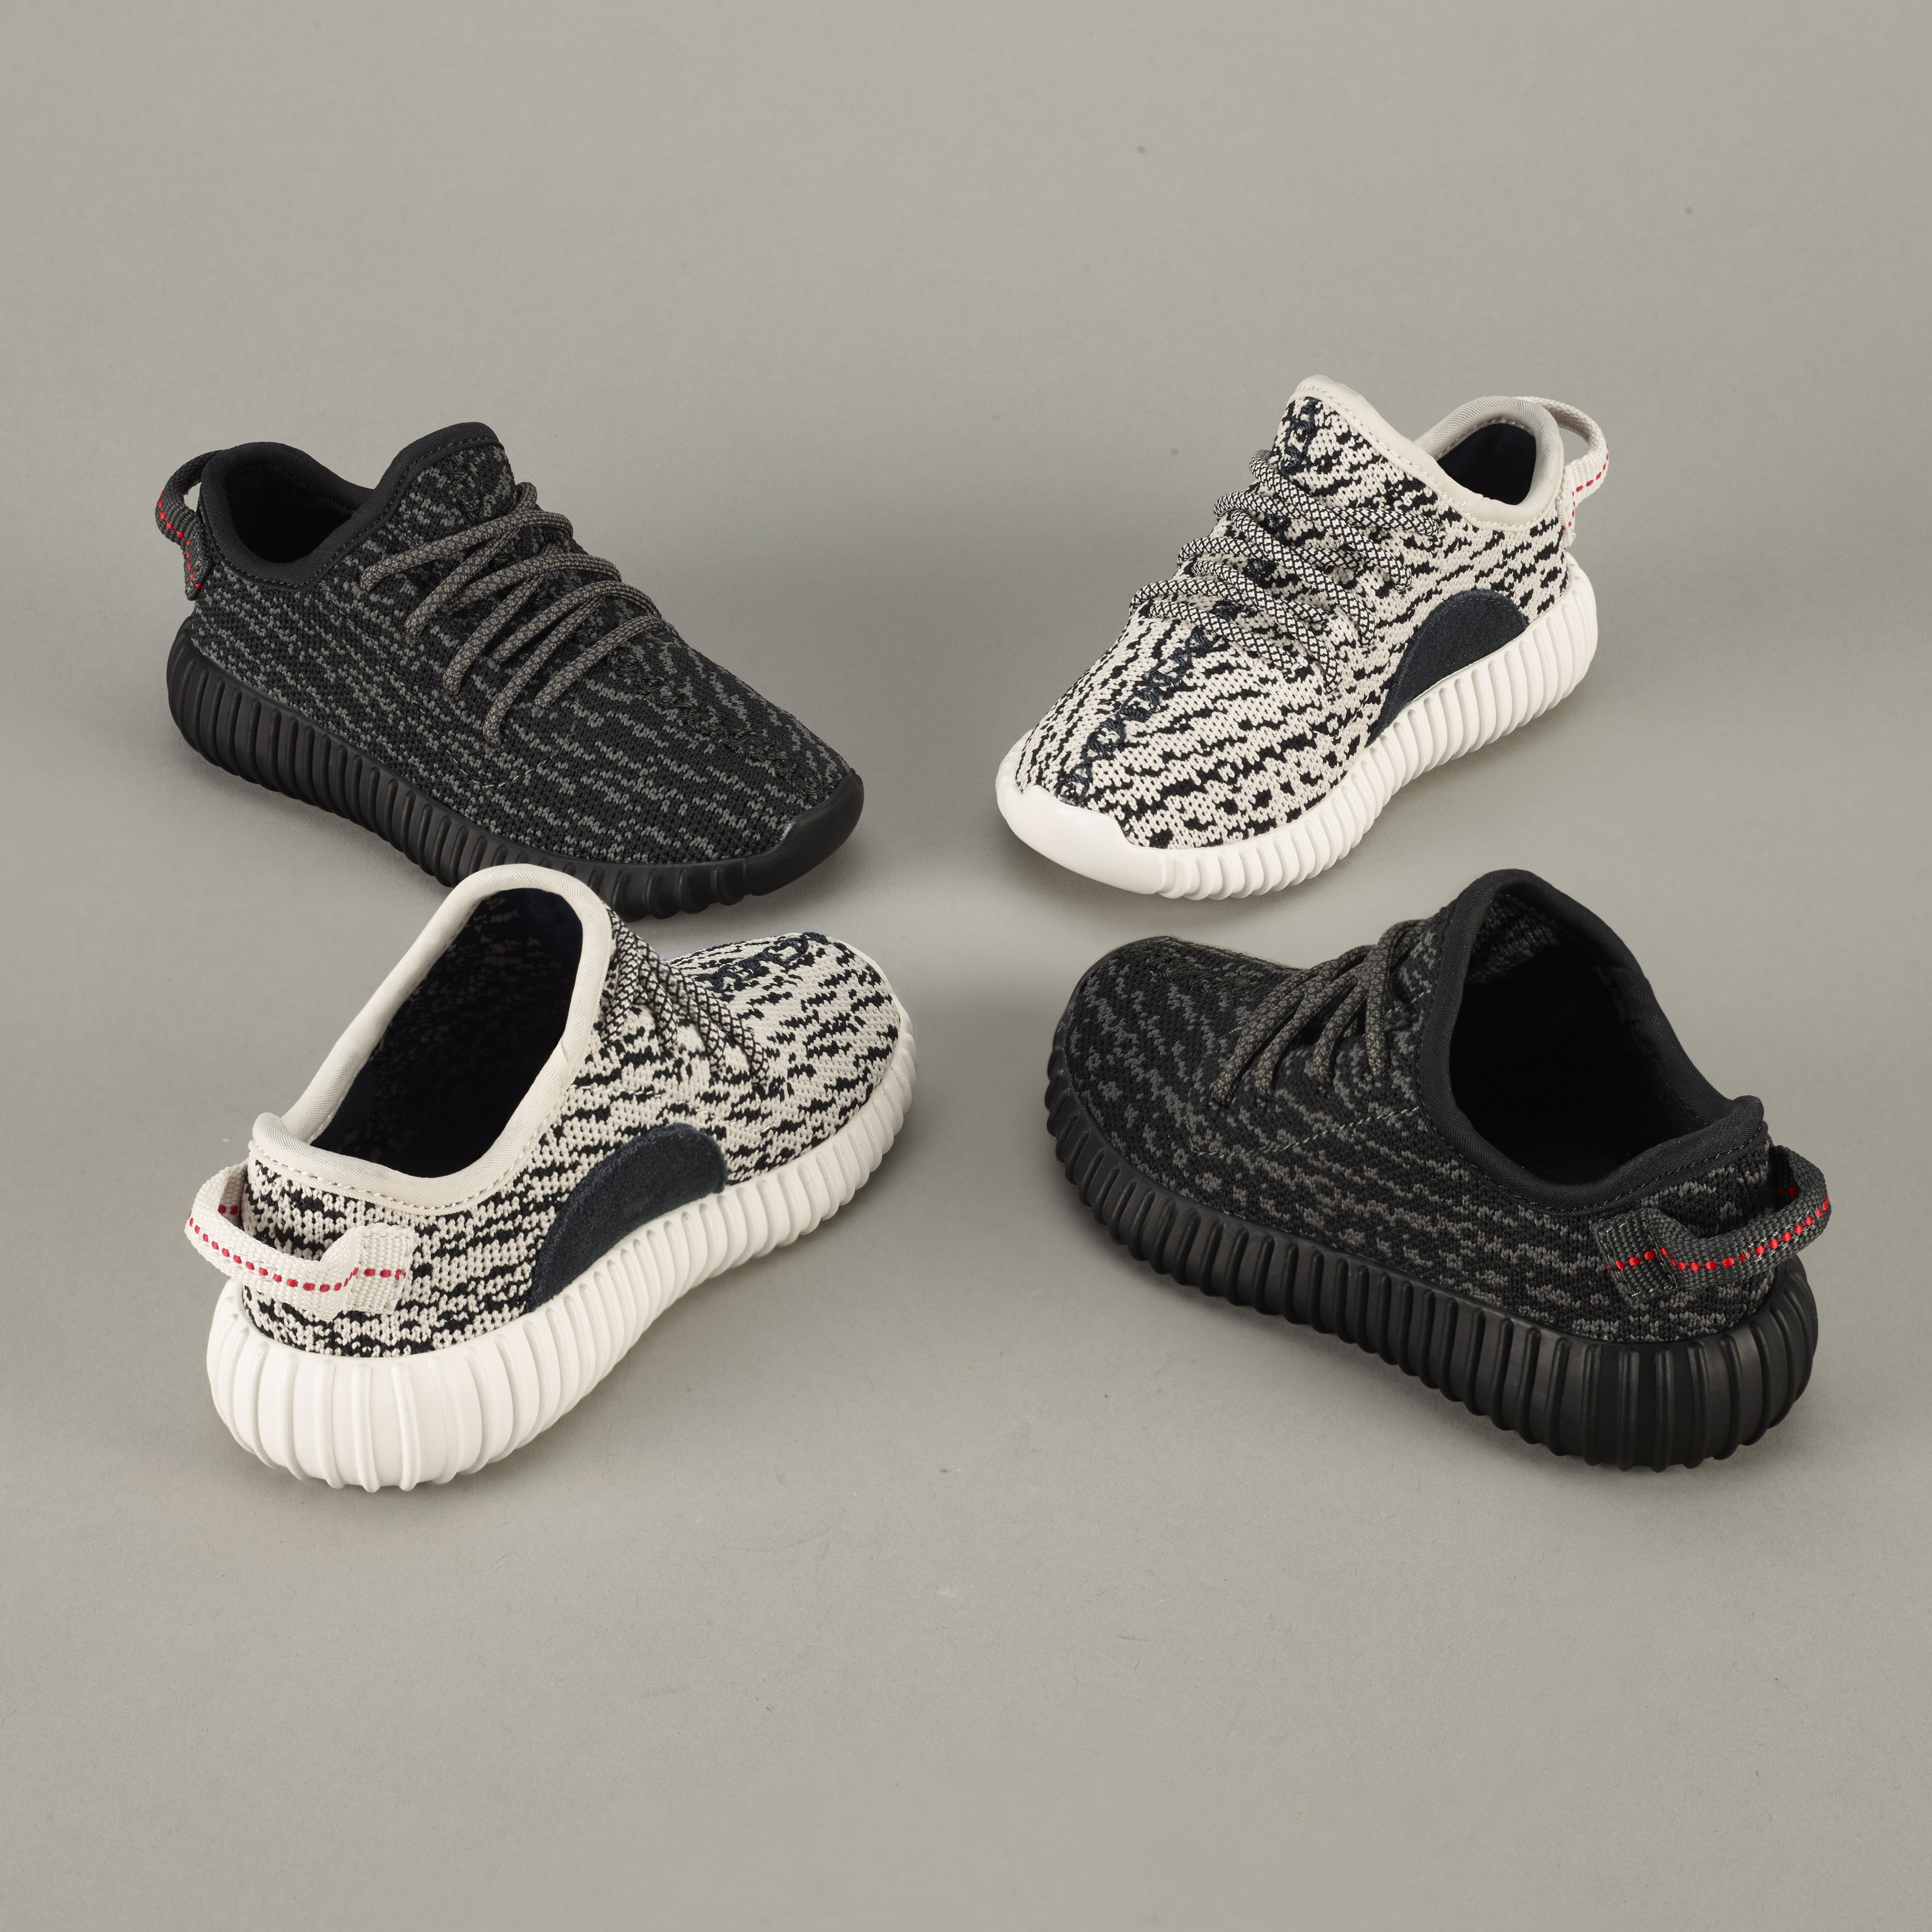 Adidas unveils toddler versions of Kanye West’s Yeezy Boost 350 – Sig